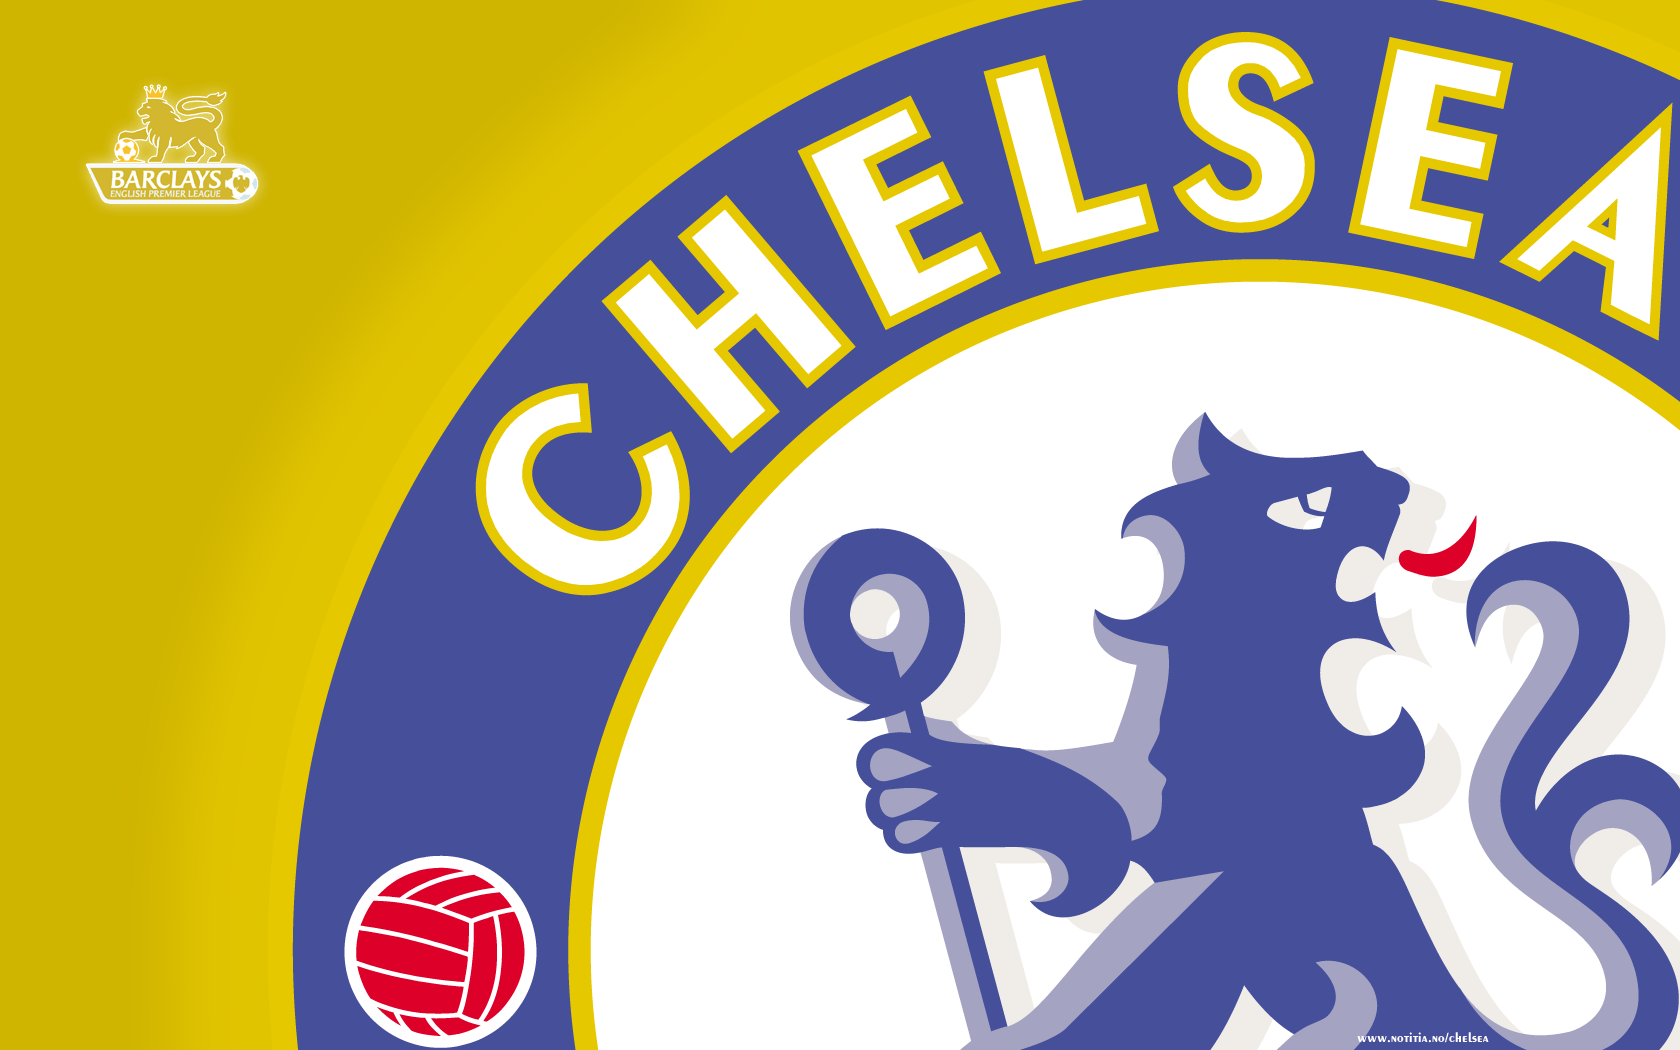 Chelsea Fc - Chelsea Fc Hd Wallpaper 2019 , HD Wallpaper & Backgrounds